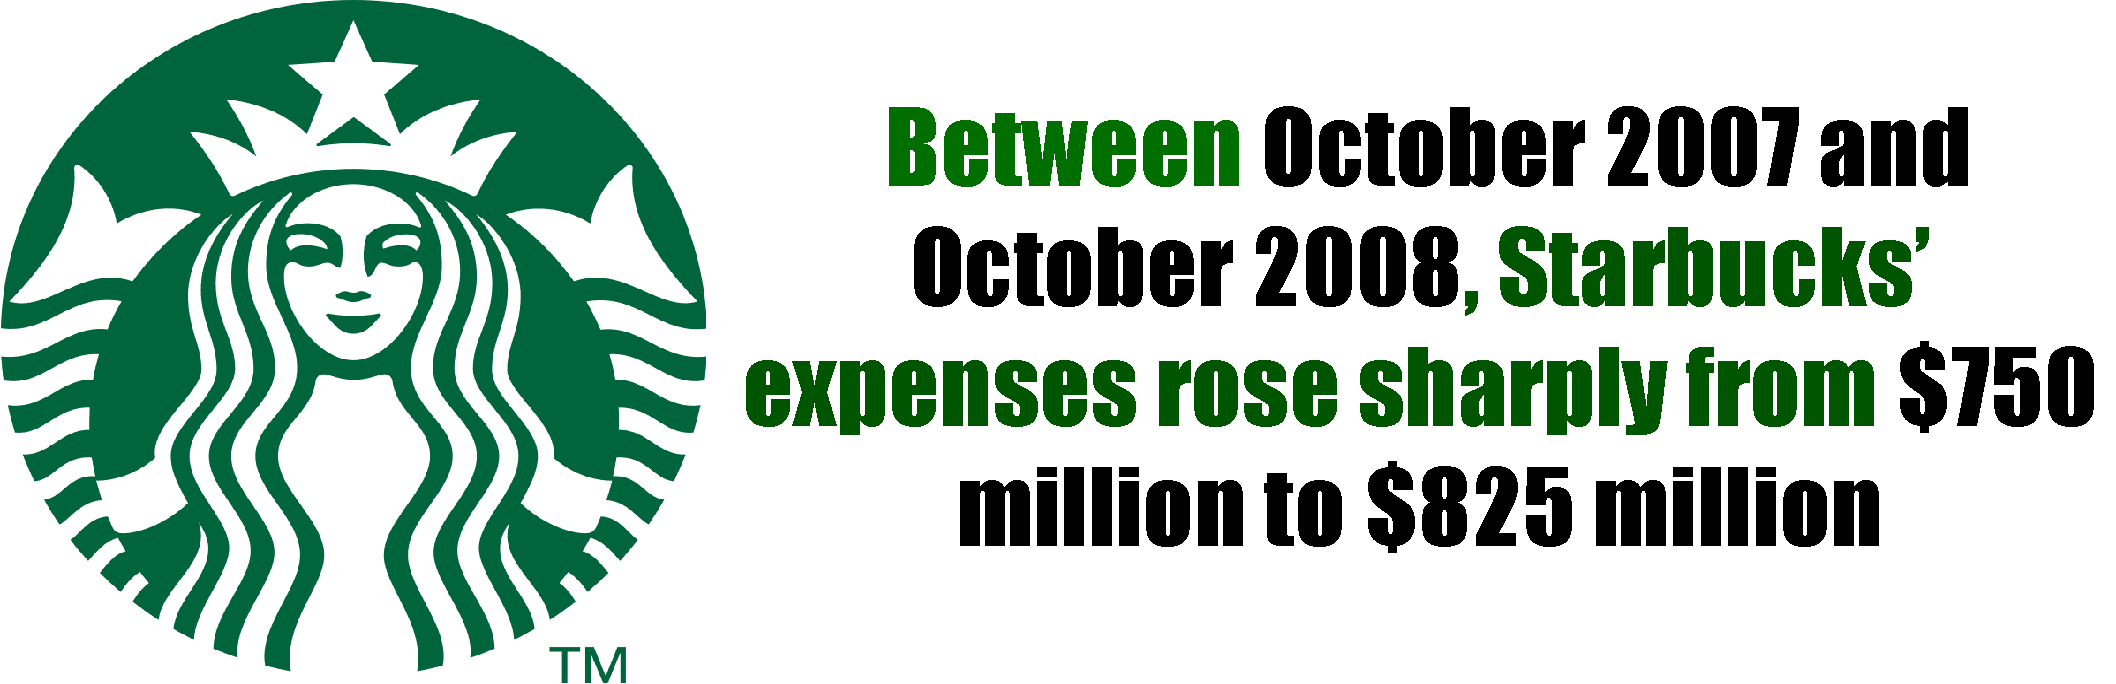 The Starbucks logo with a sentence to its right detailing the steep rise in expenses between October 2007 and October 2008